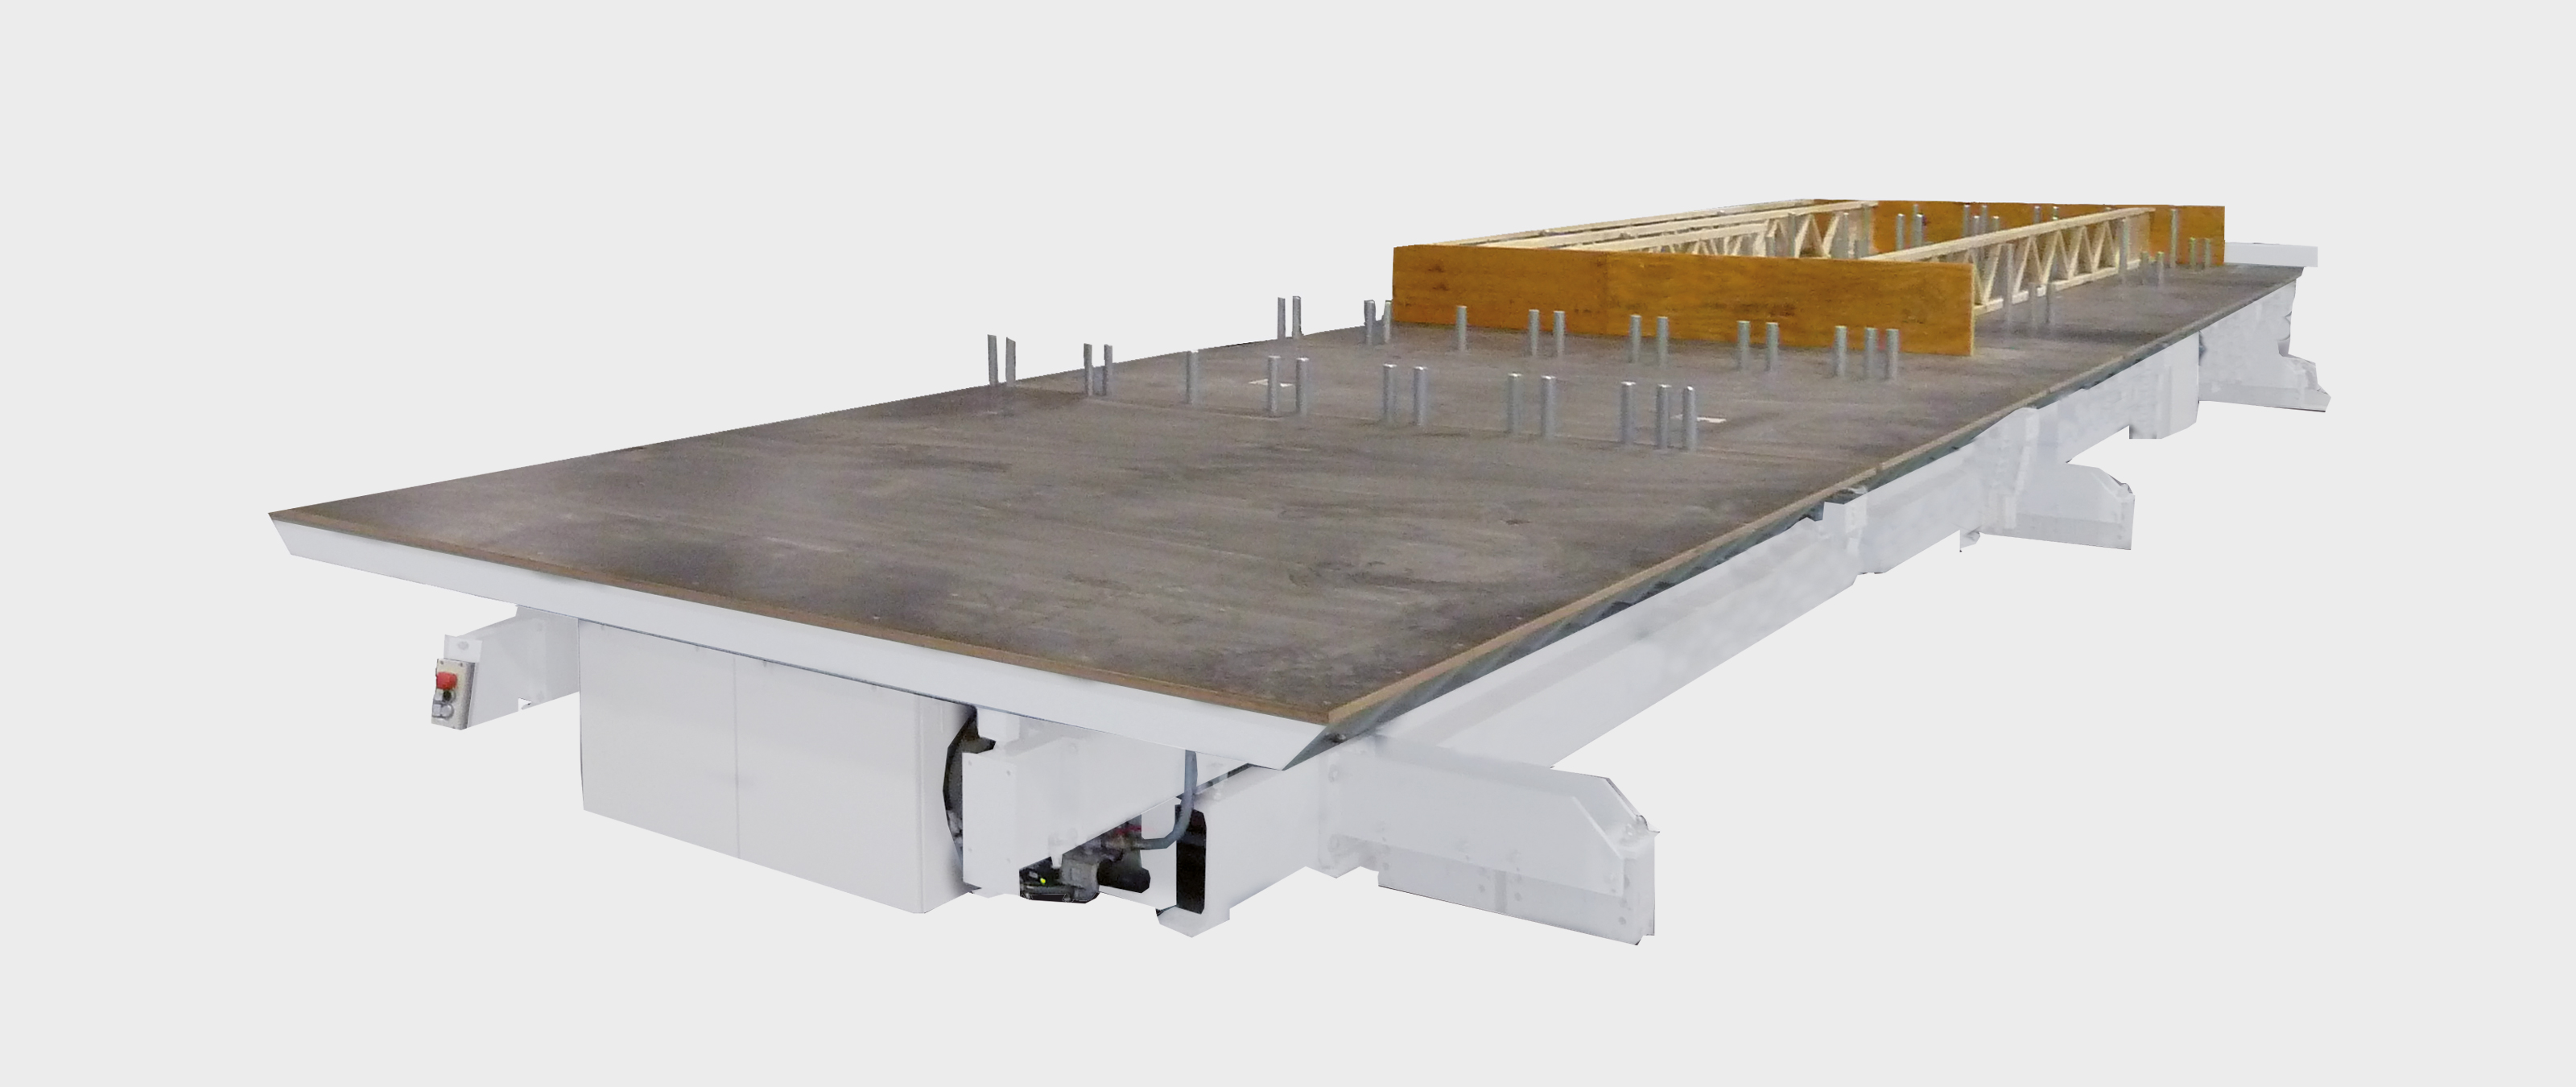 WEINMANN BUILDTEQ F-500 roof and ceilingtable